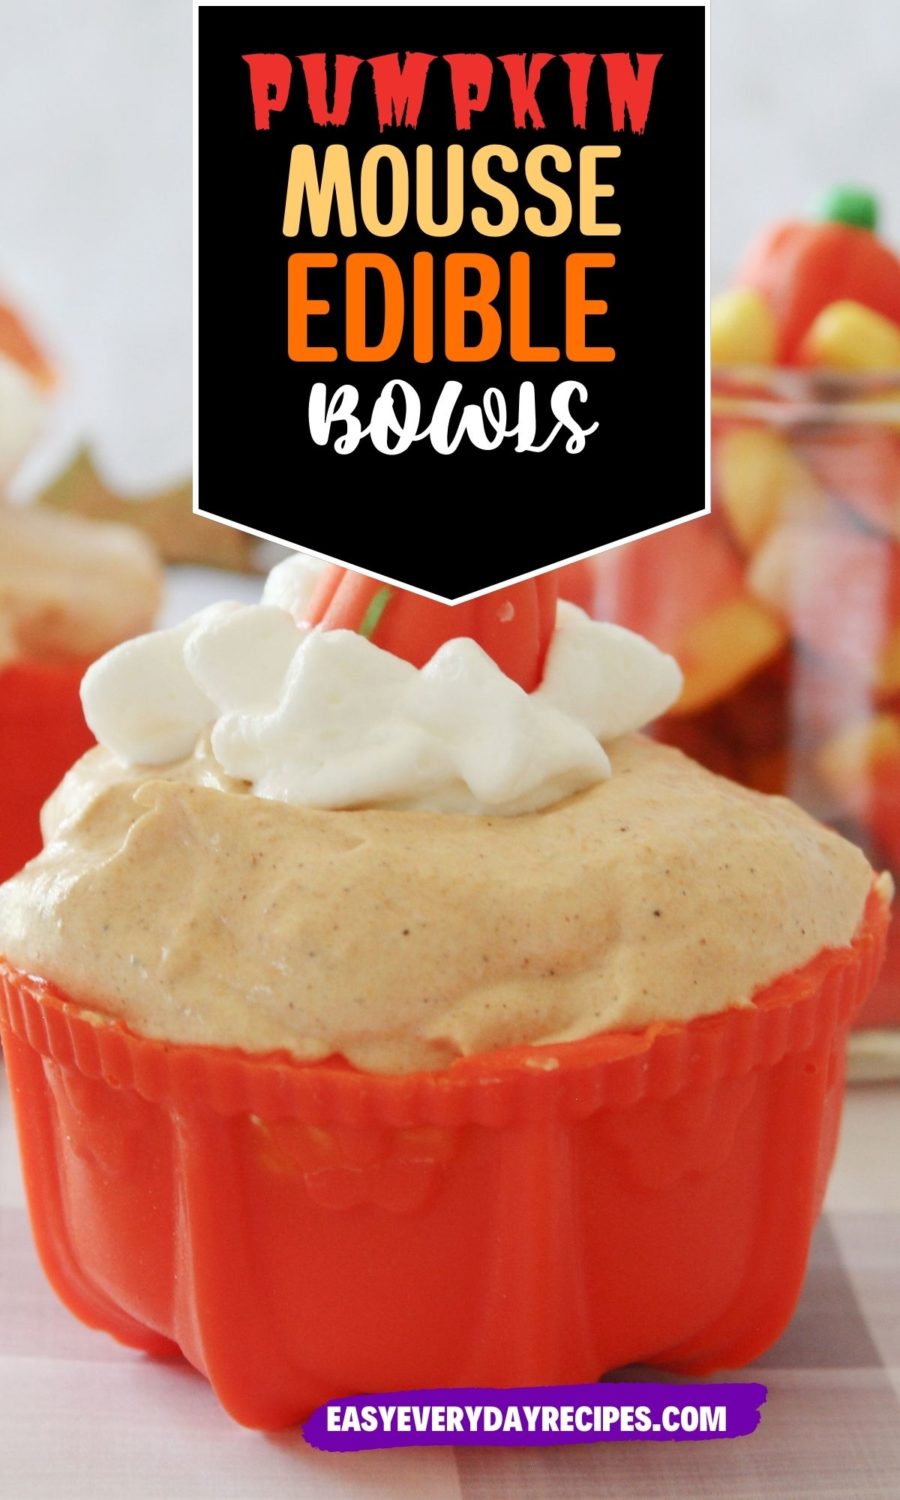 Pumpkin mousse edible bowls with the text pumpkin mousse edible bowls.